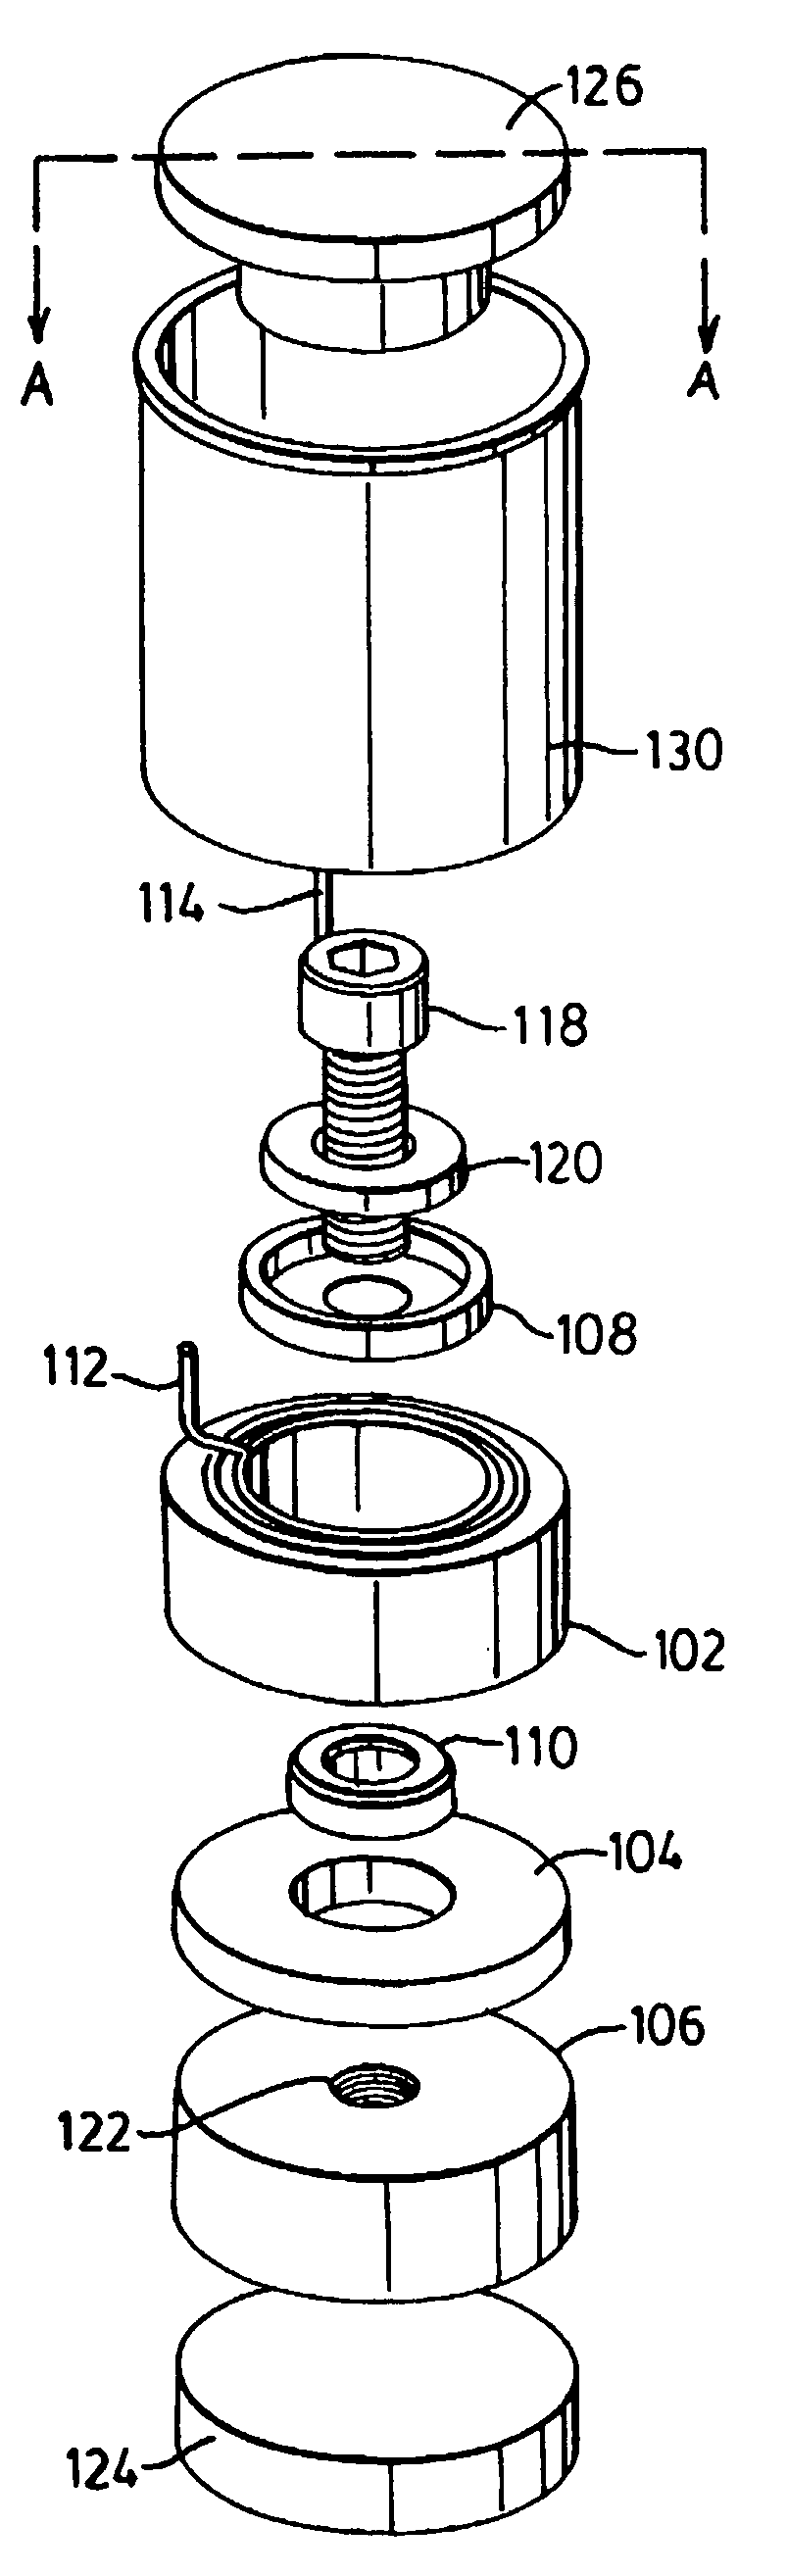 Method and apparatus for damping an ultrasonic transducer suitable for time of flight ranging and level measurement systems